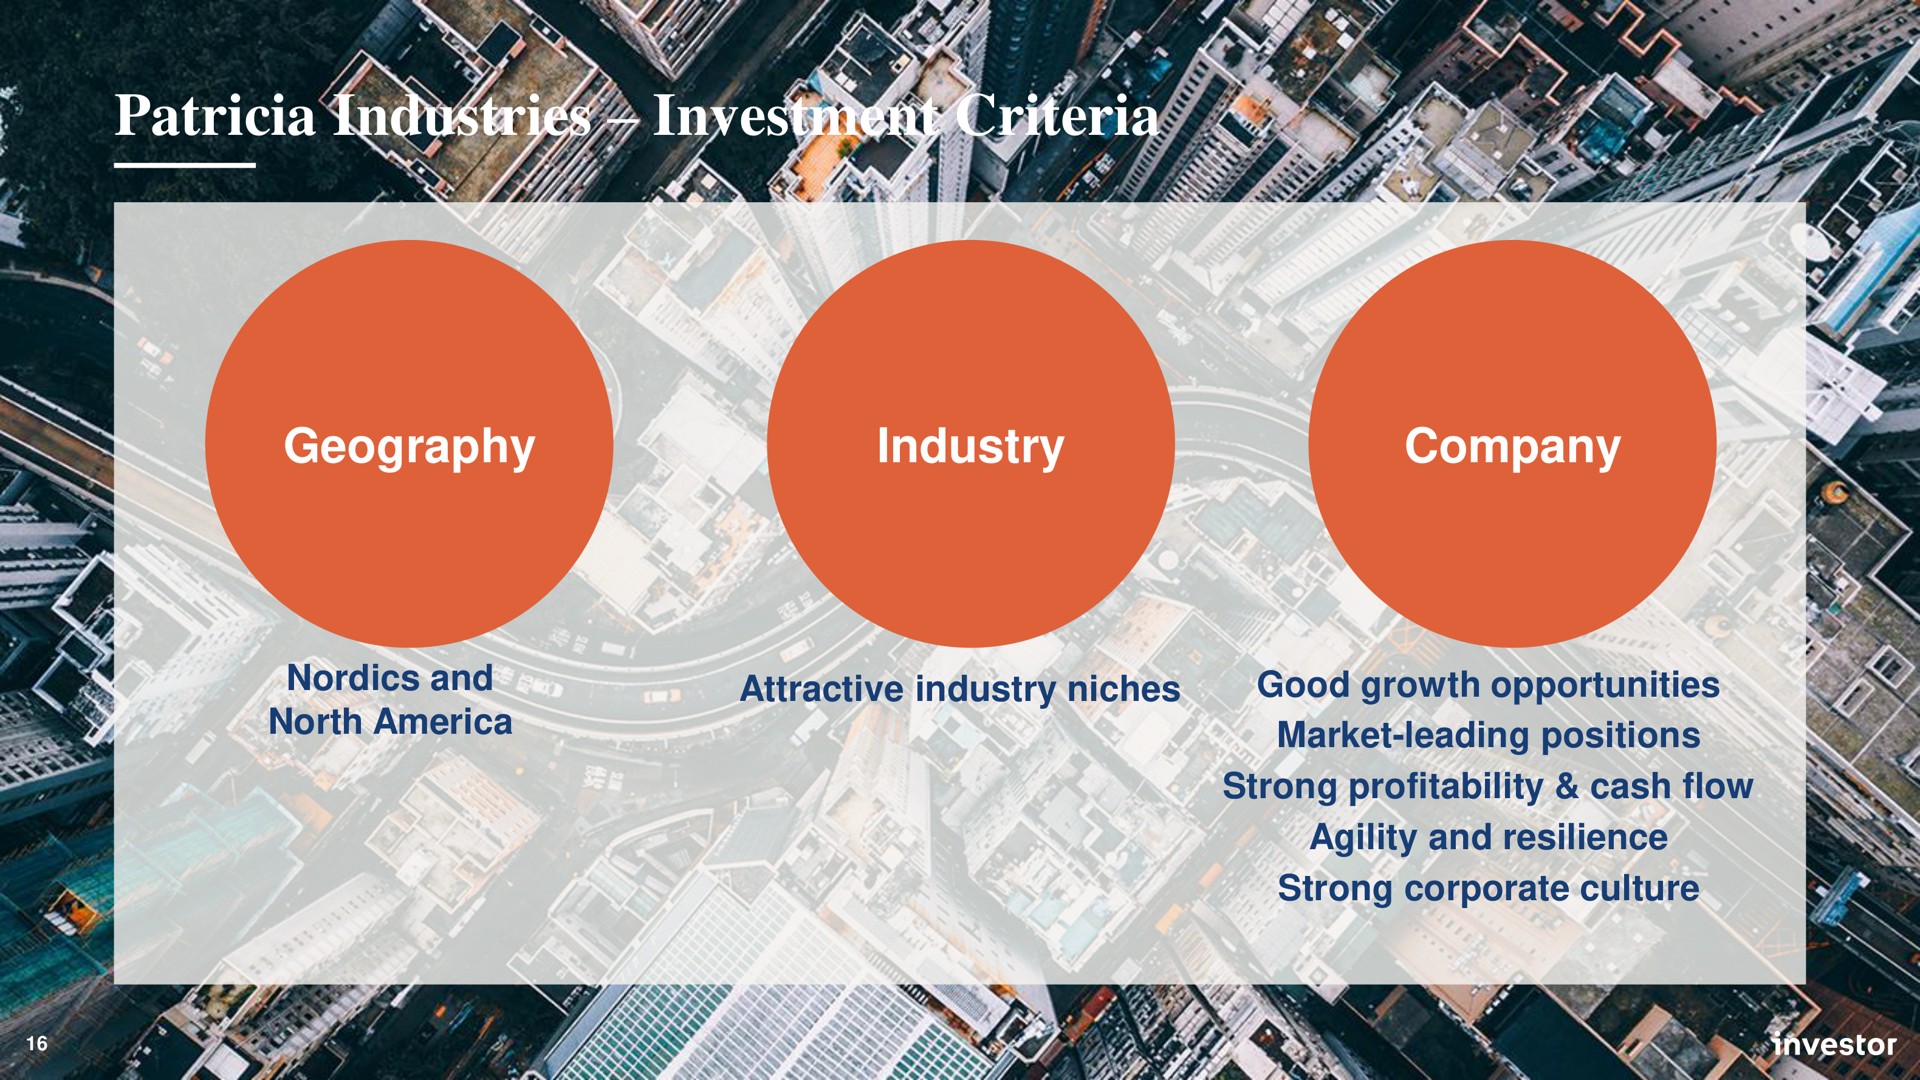 industries investment criteria geography | Investor AB